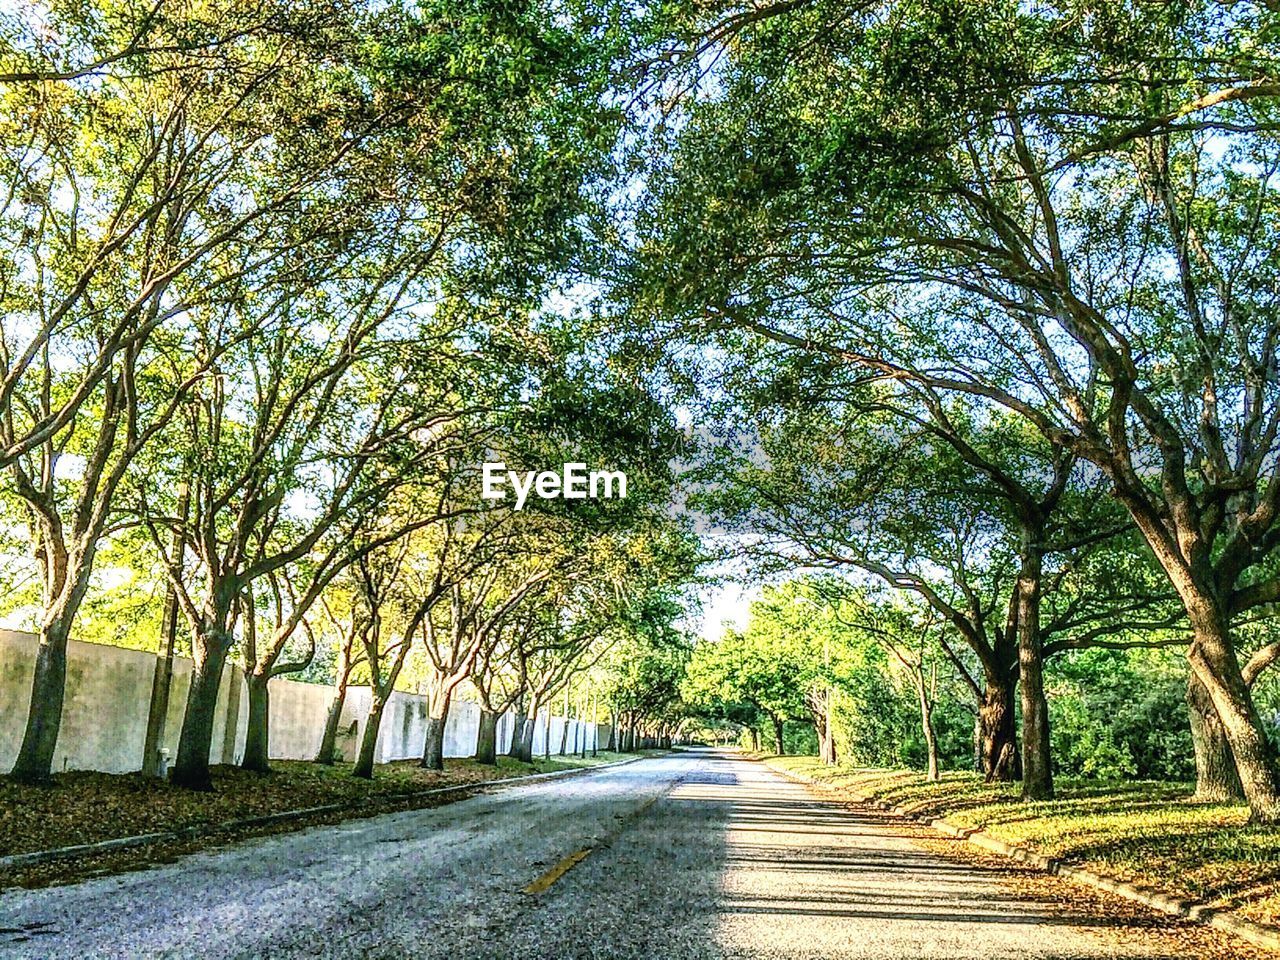 VIEW OF EMPTY ROAD ALONG TREES